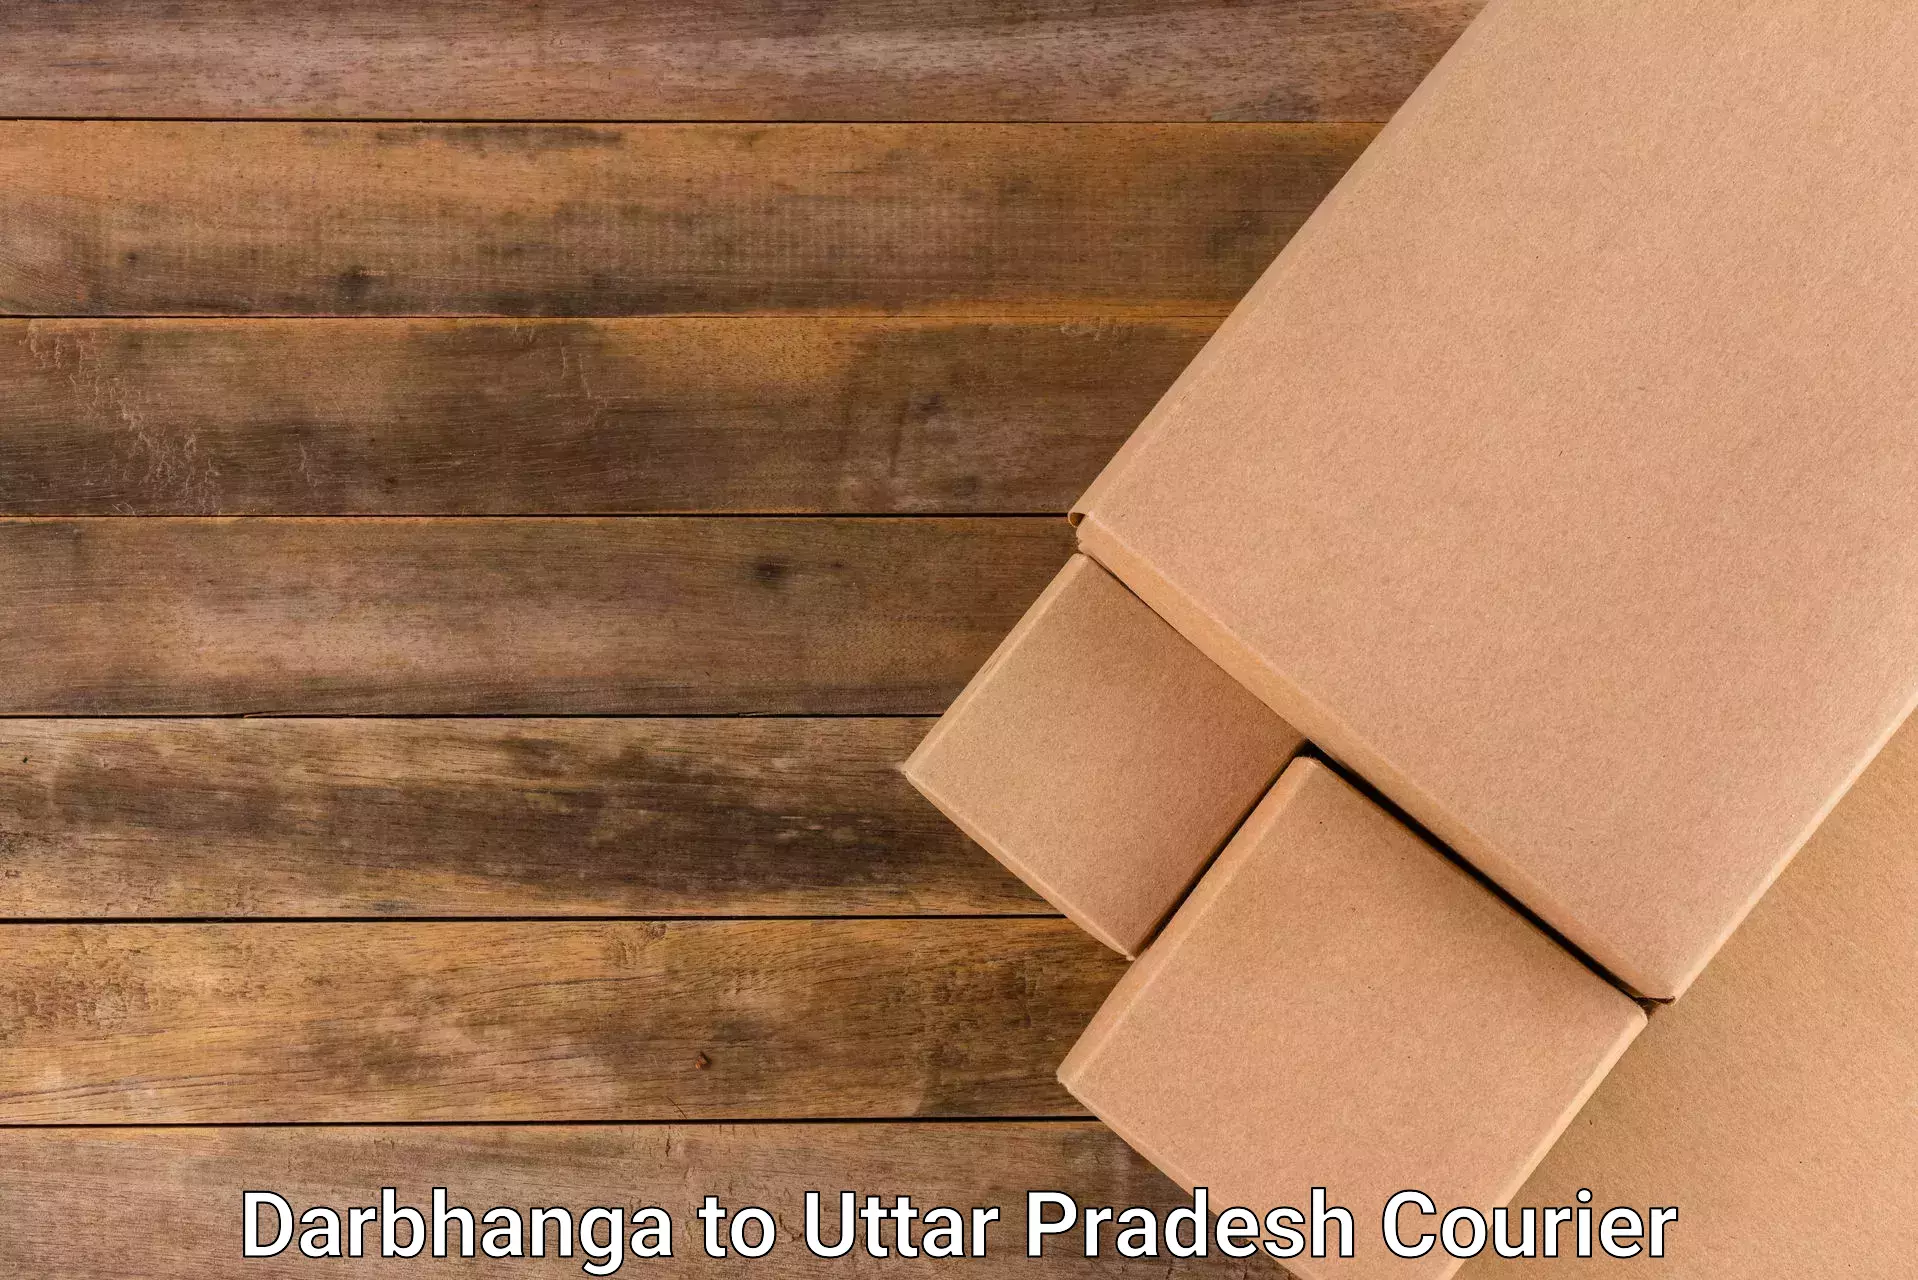 Courier service comparison Darbhanga to IIT Kanpur